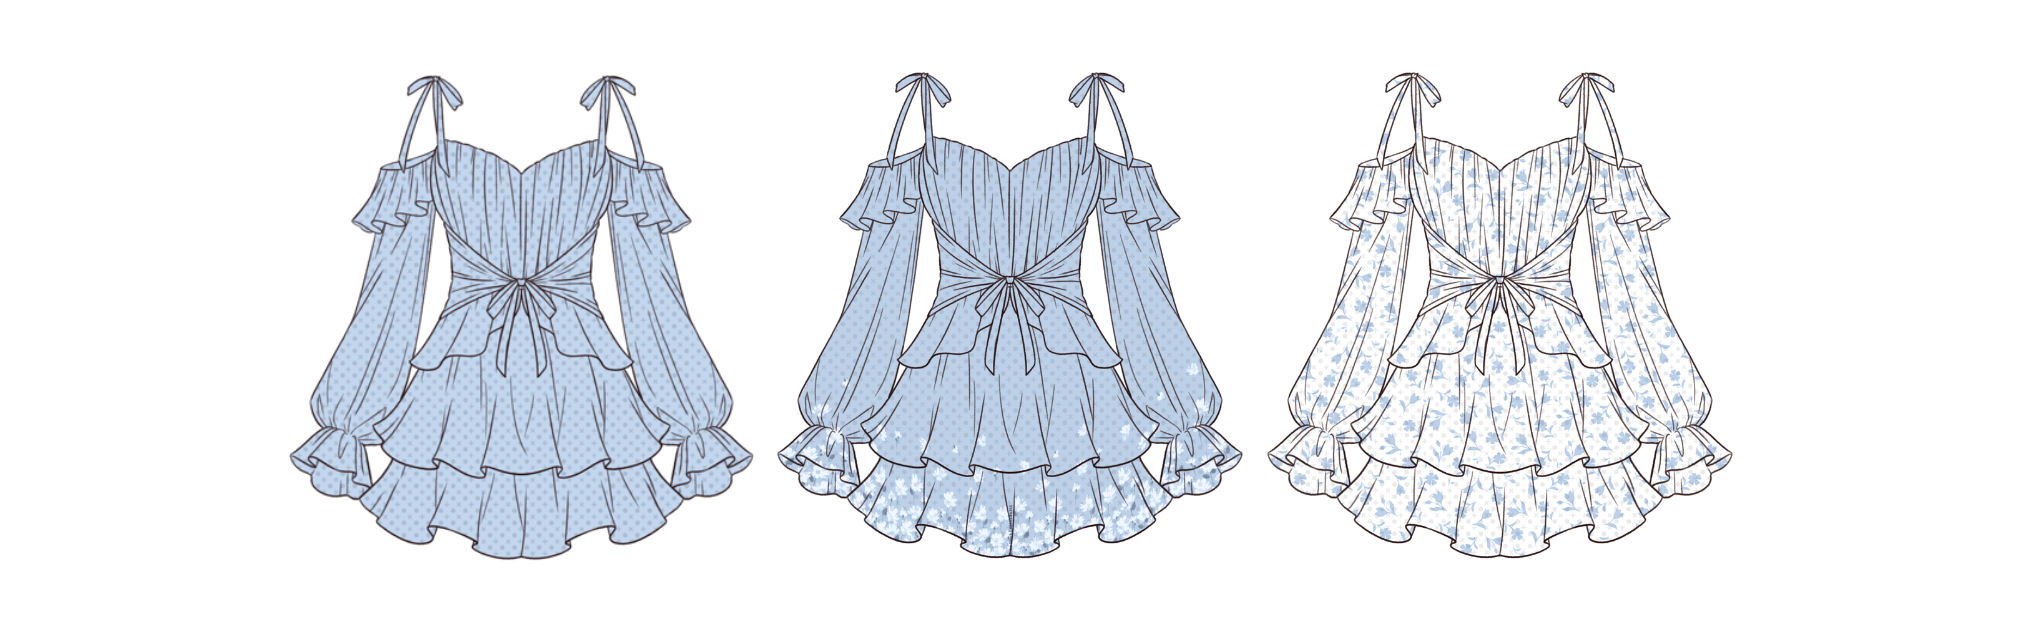 Sketches of the Euphemia dress in three different prints